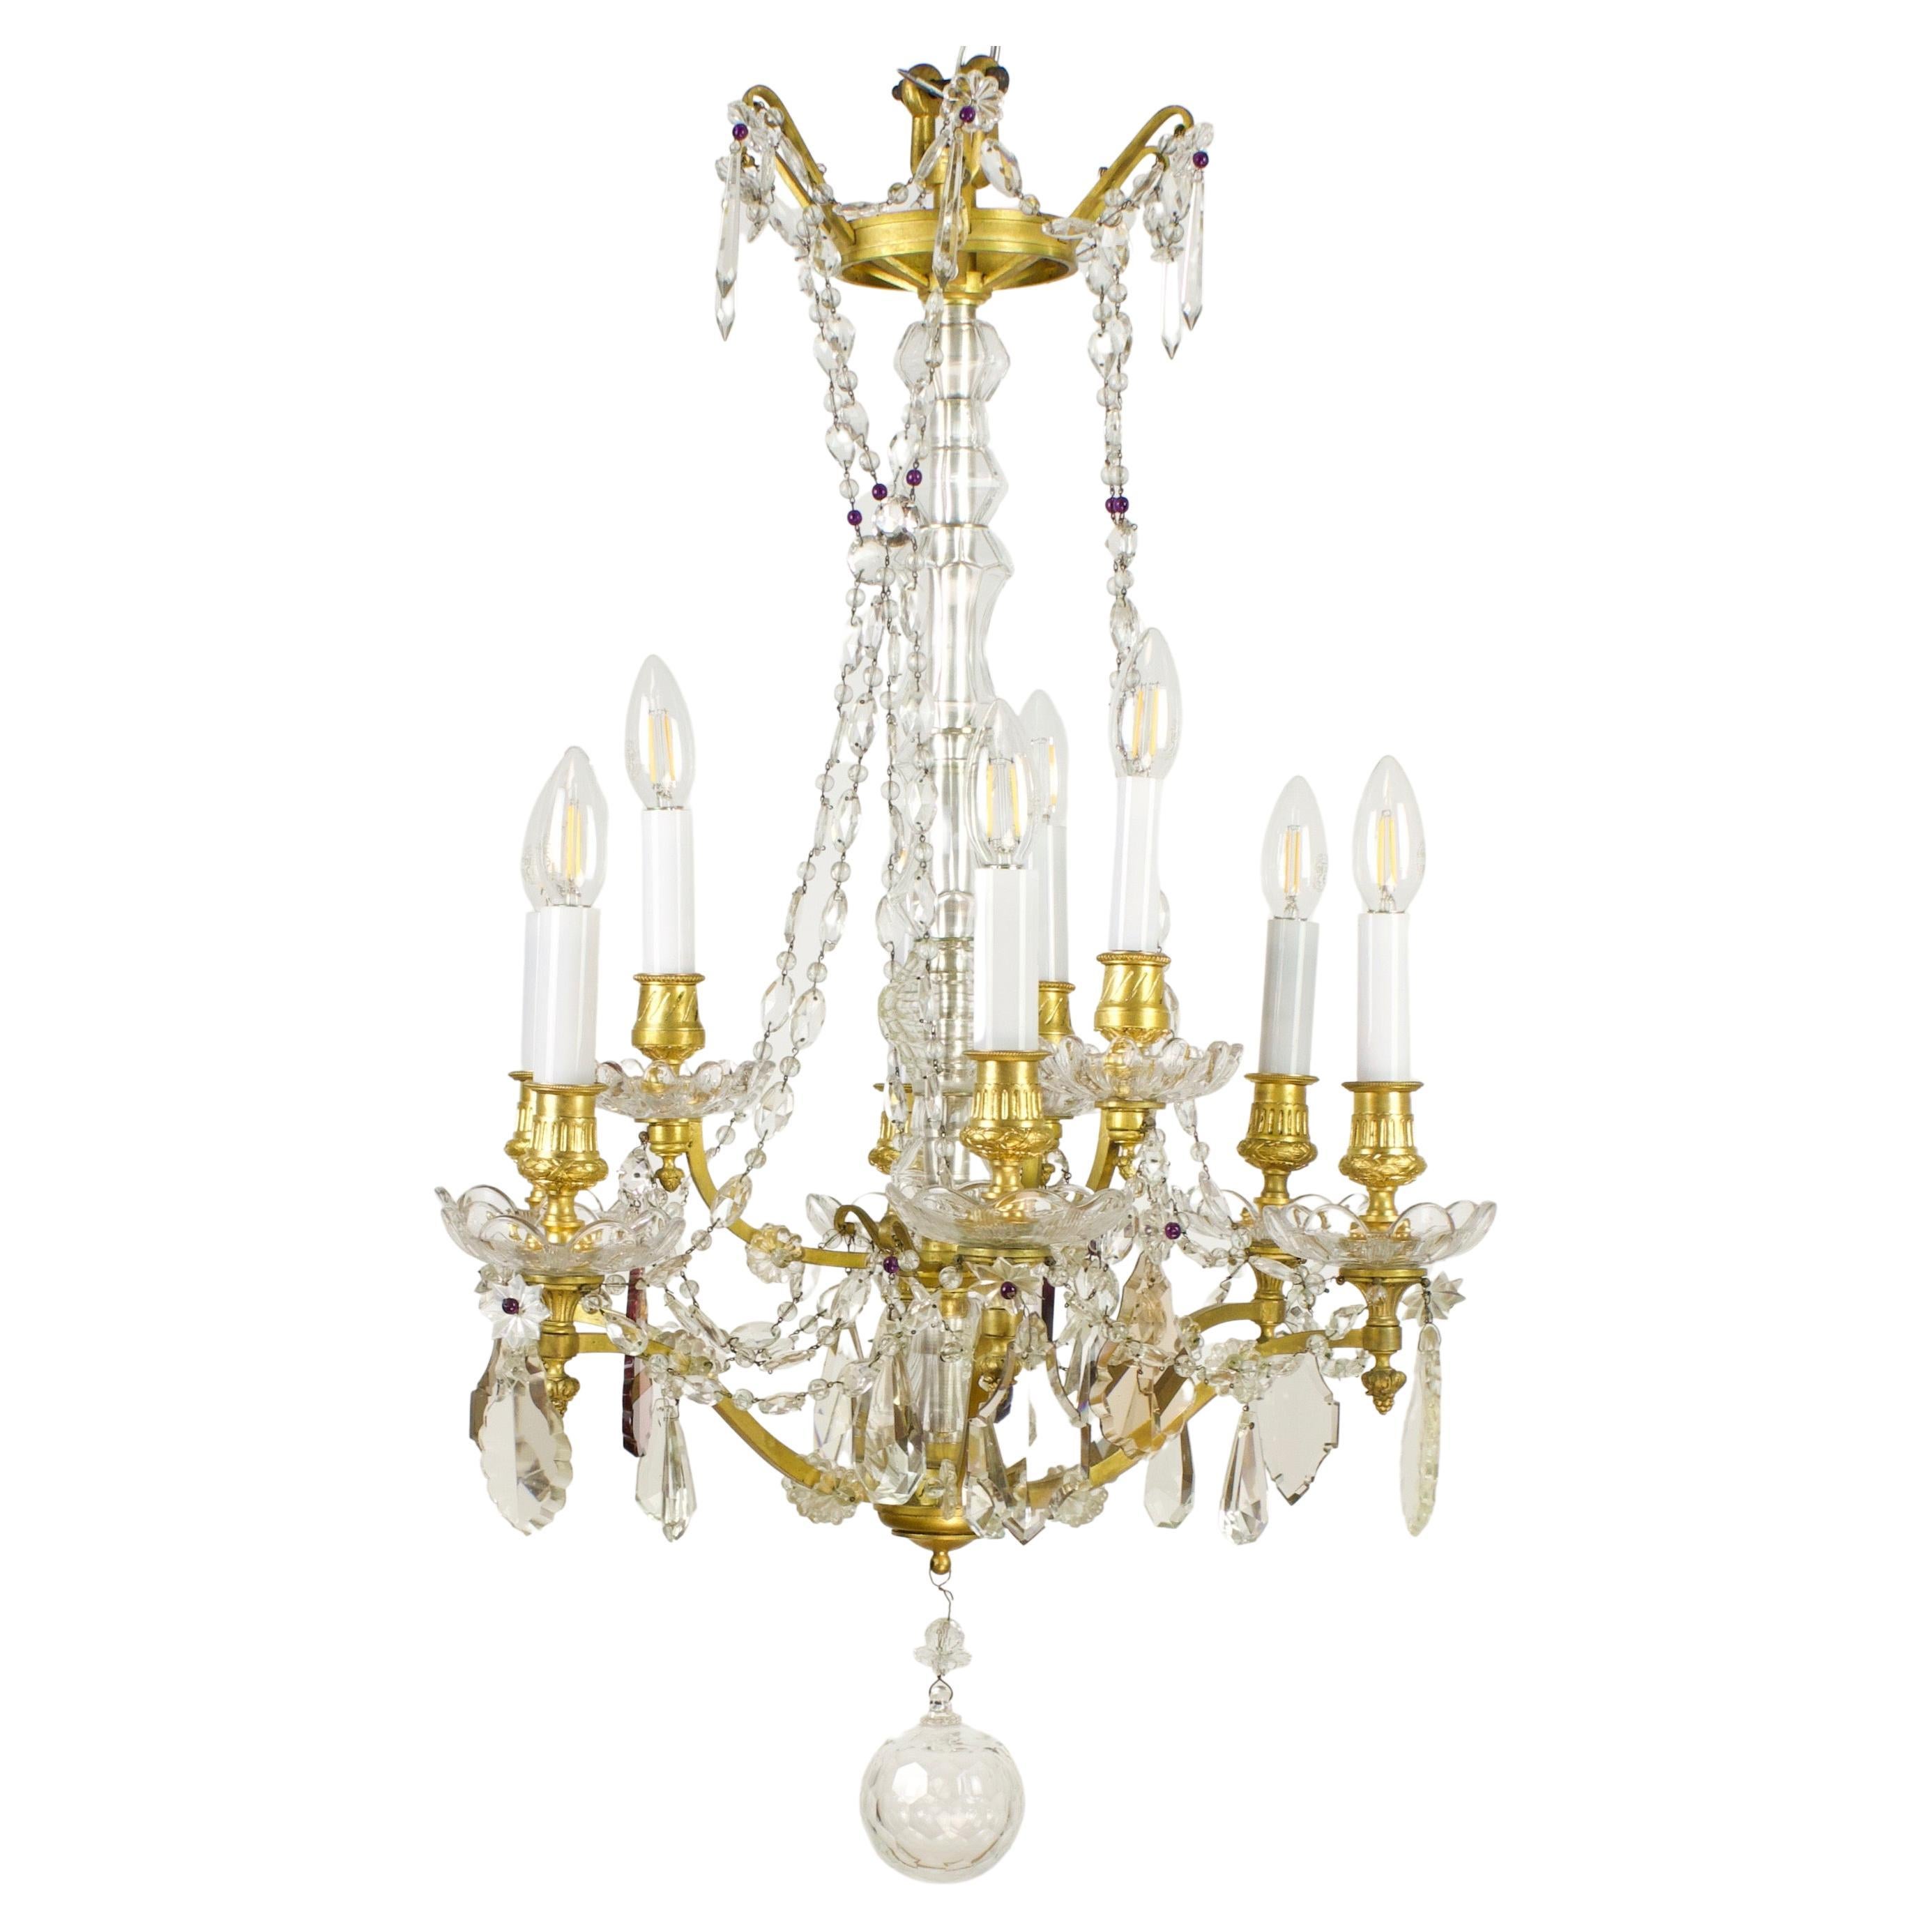 French Maison Colin 19th Century Louis XV Gilt Bronze Cut Crystal Chandelier